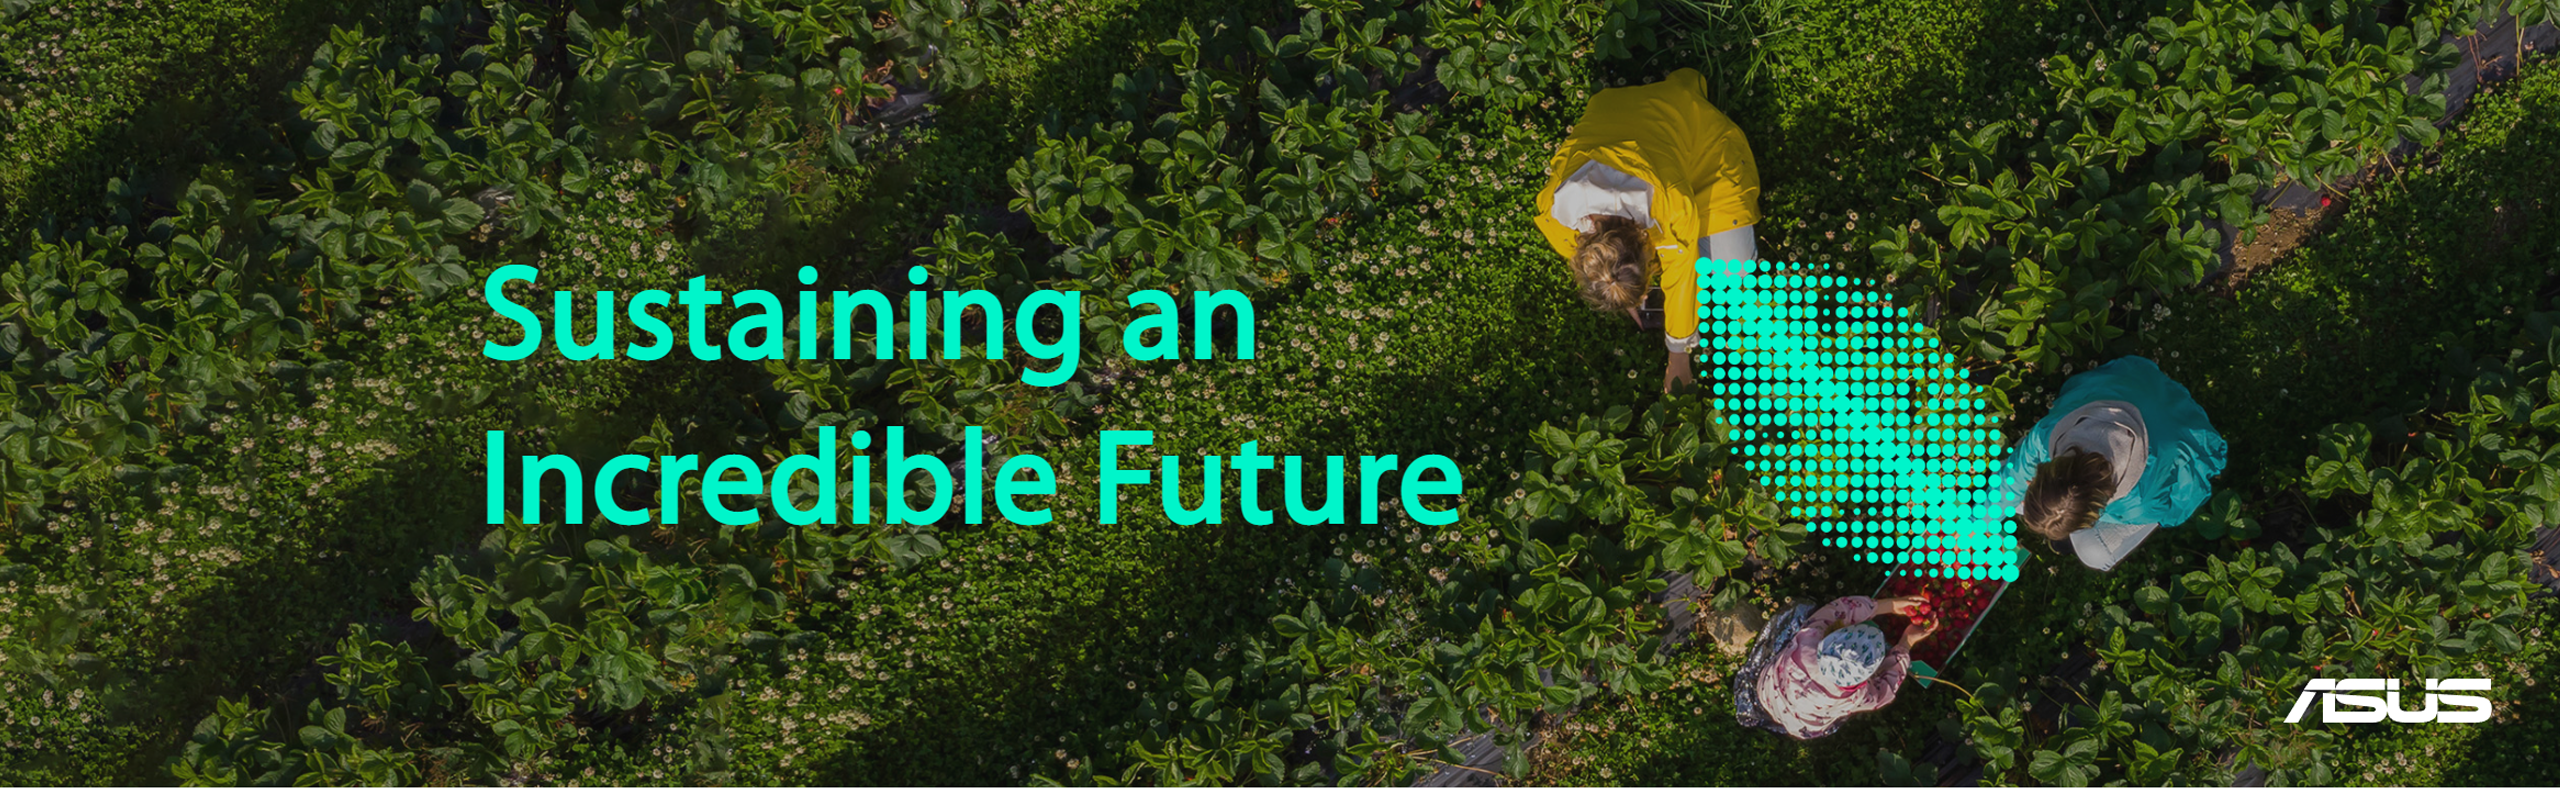 Sustaining an incredible future